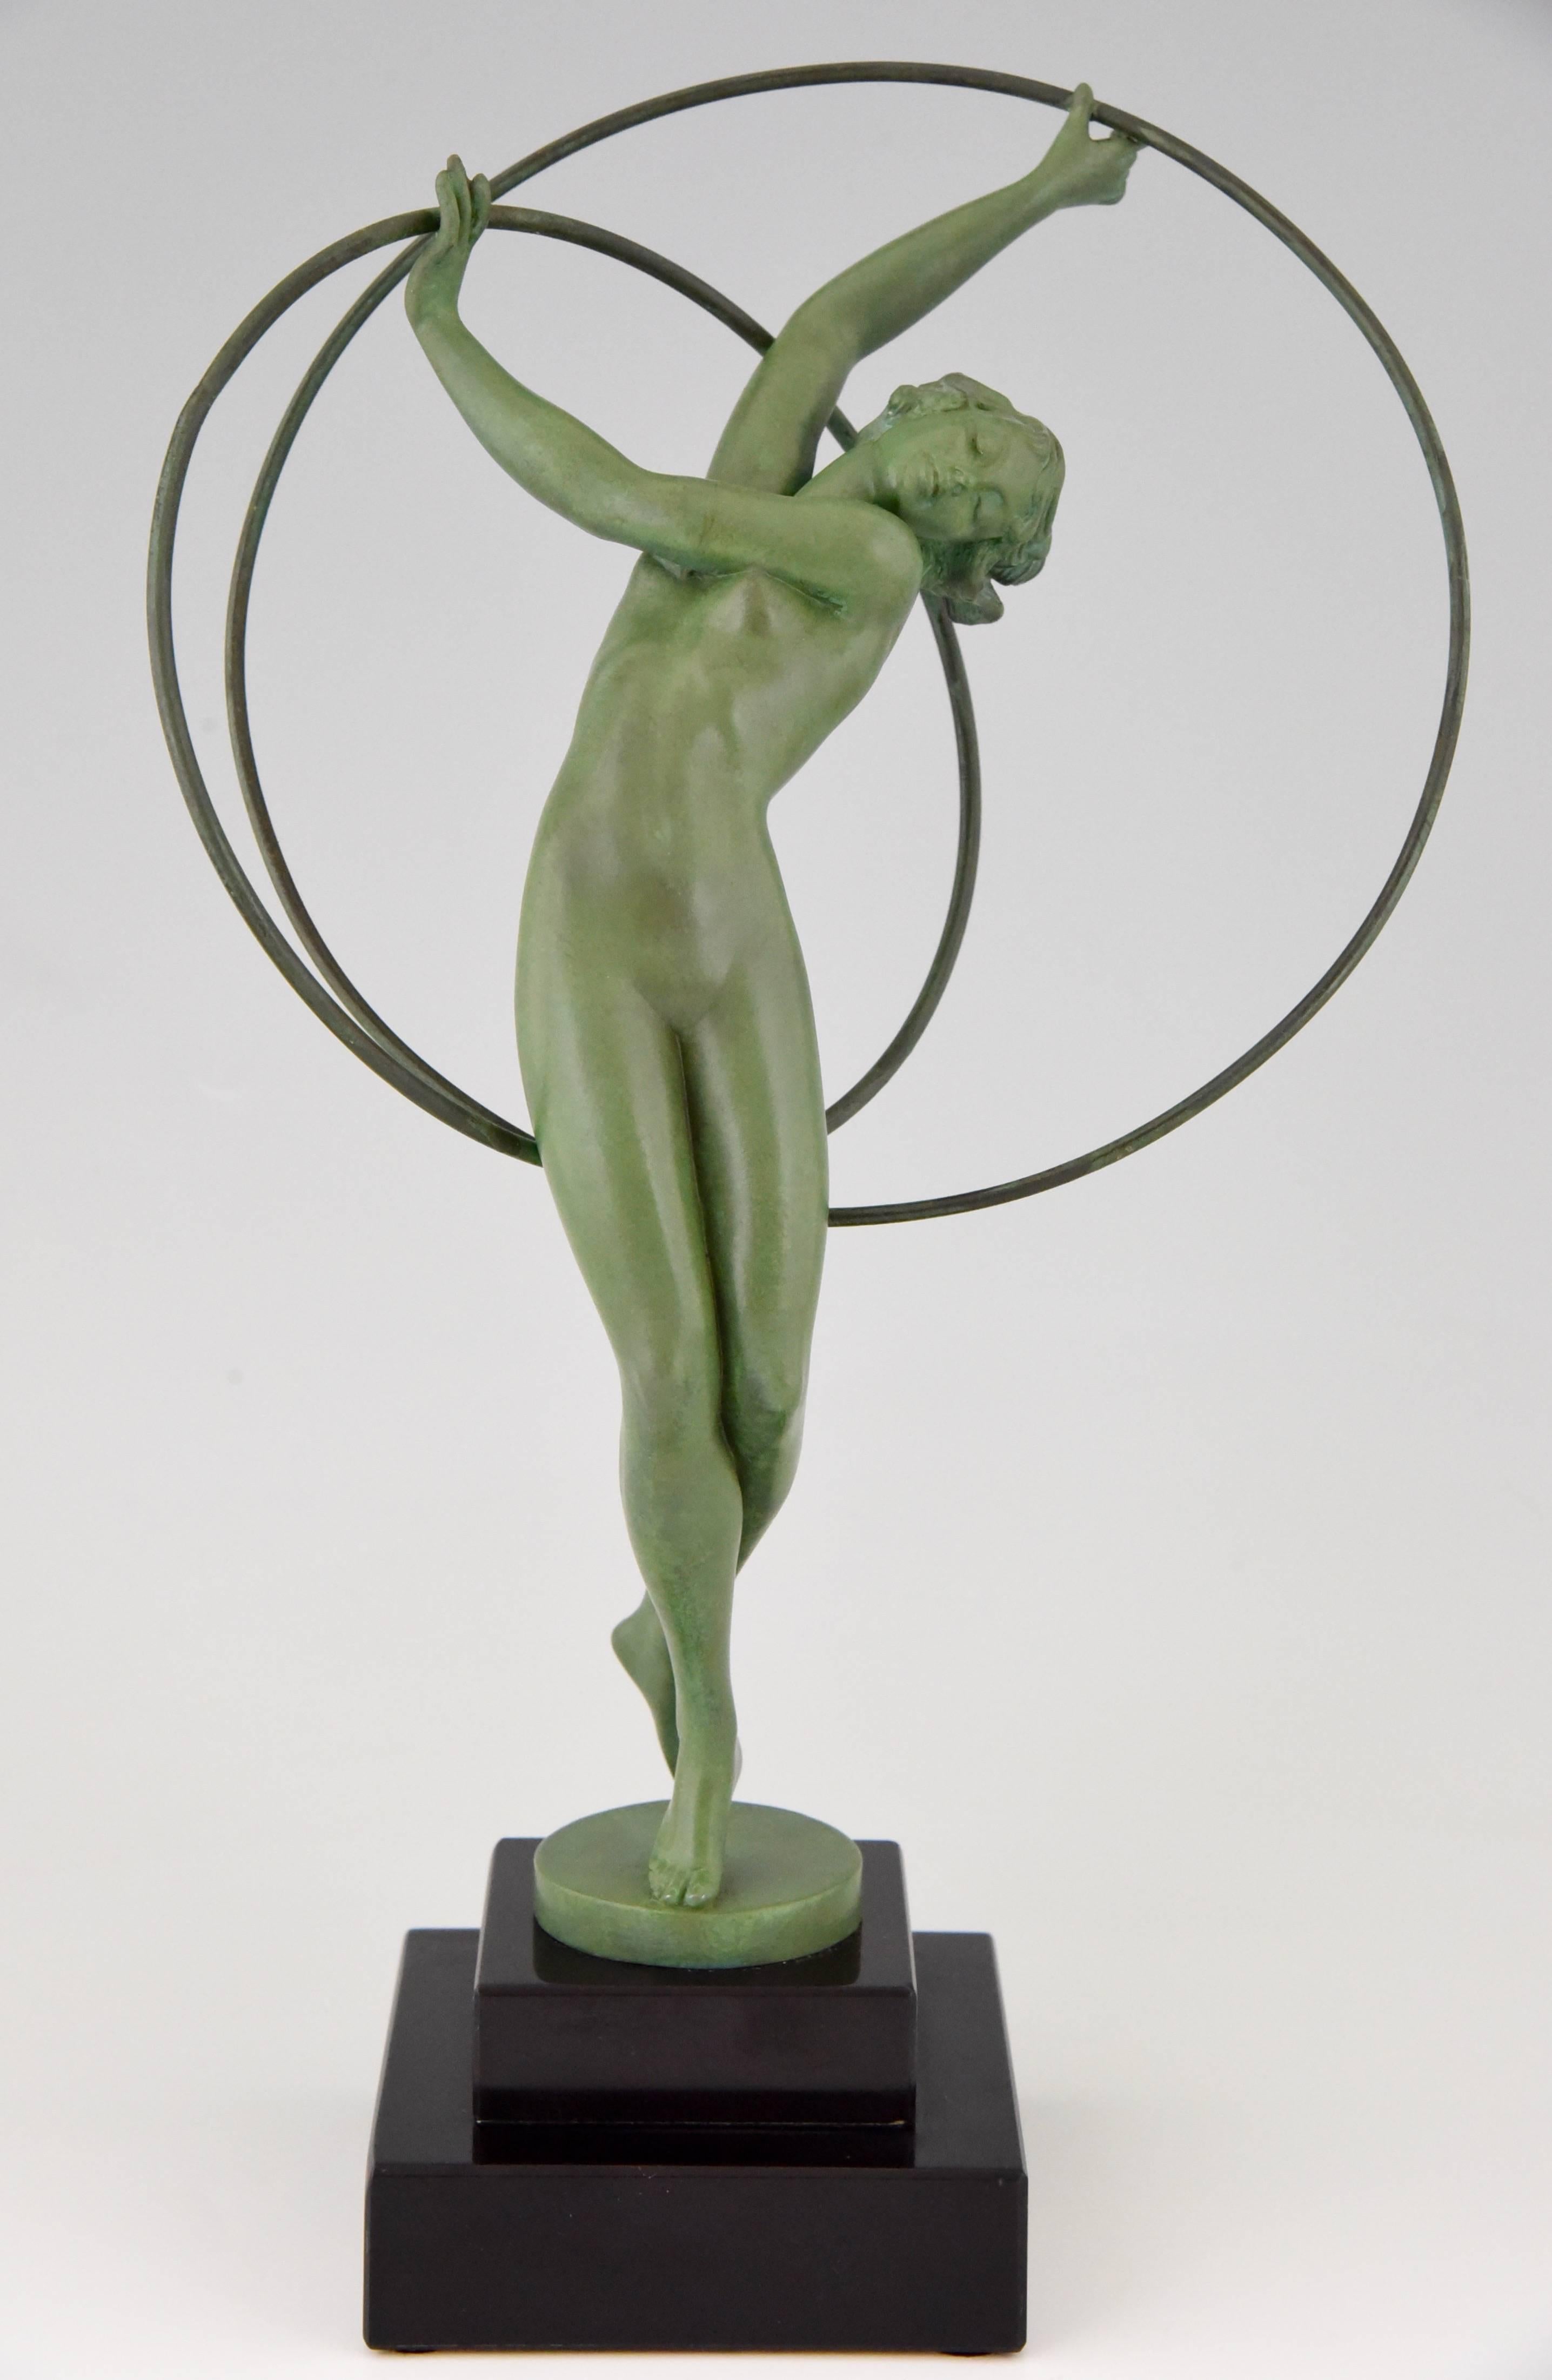 Elegant Art Deco nude hoop dancer signed Fayral, pseudonym of the french artist Pierre Le Faguays.

Artist / Maker:
Fayral, Le Faguays.
Signature / Marks:
Fayral.
Style:
Art Deco.
Date:
1930
Material:
Metal with green patina.  Black